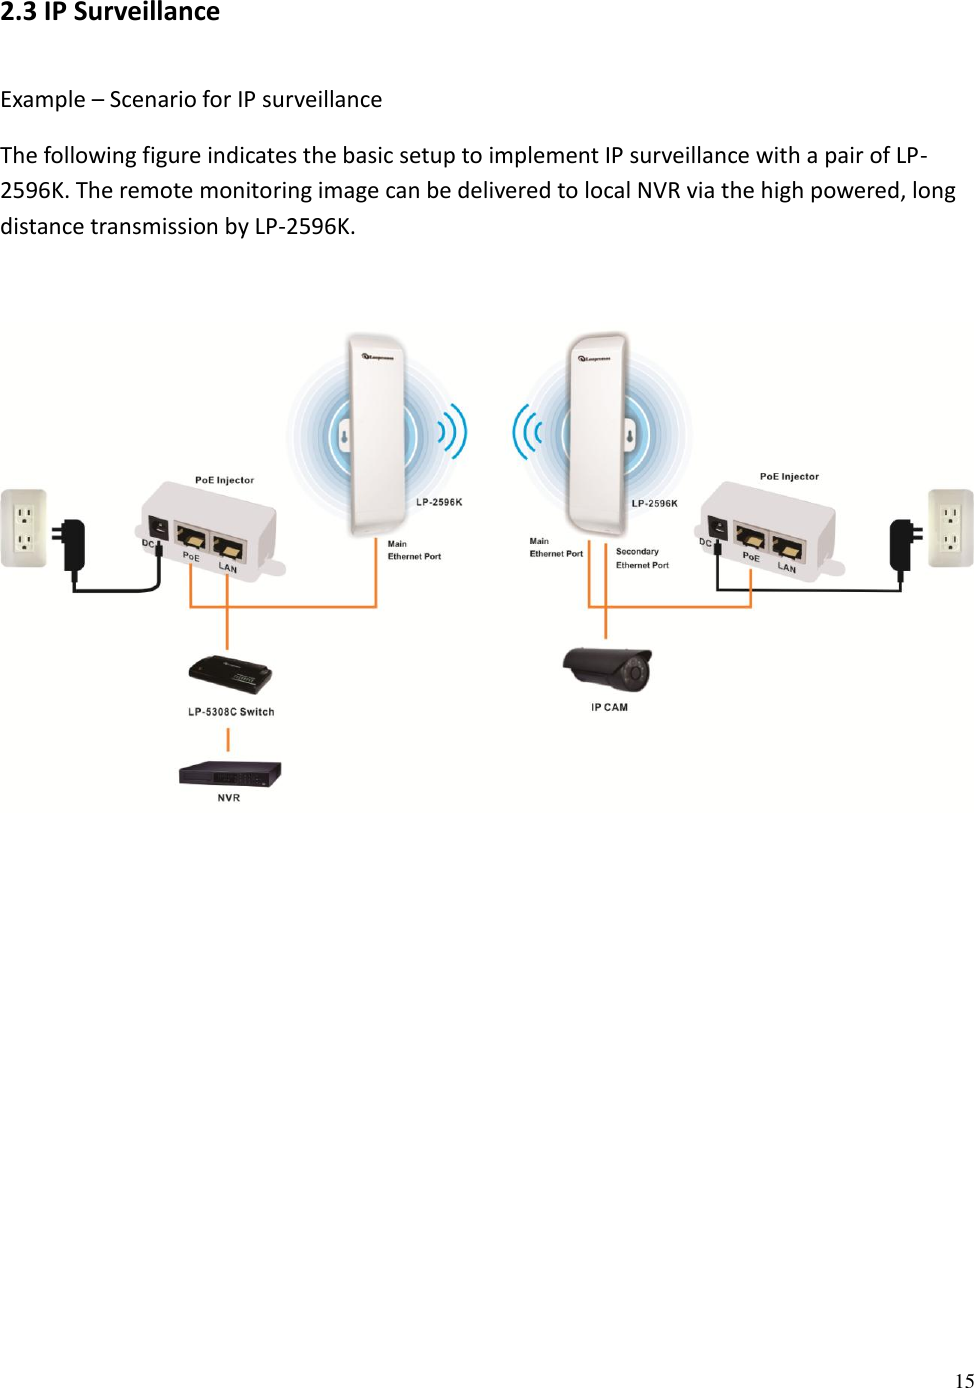 15  2.3 IP Surveillance Example – Scenario for IP surveillance The following figure indicates the basic setup to implement IP surveillance with a pair of LP-2596K. The remote monitoring image can be delivered to local NVR via the high powered, long distance transmission by LP-2596K.      